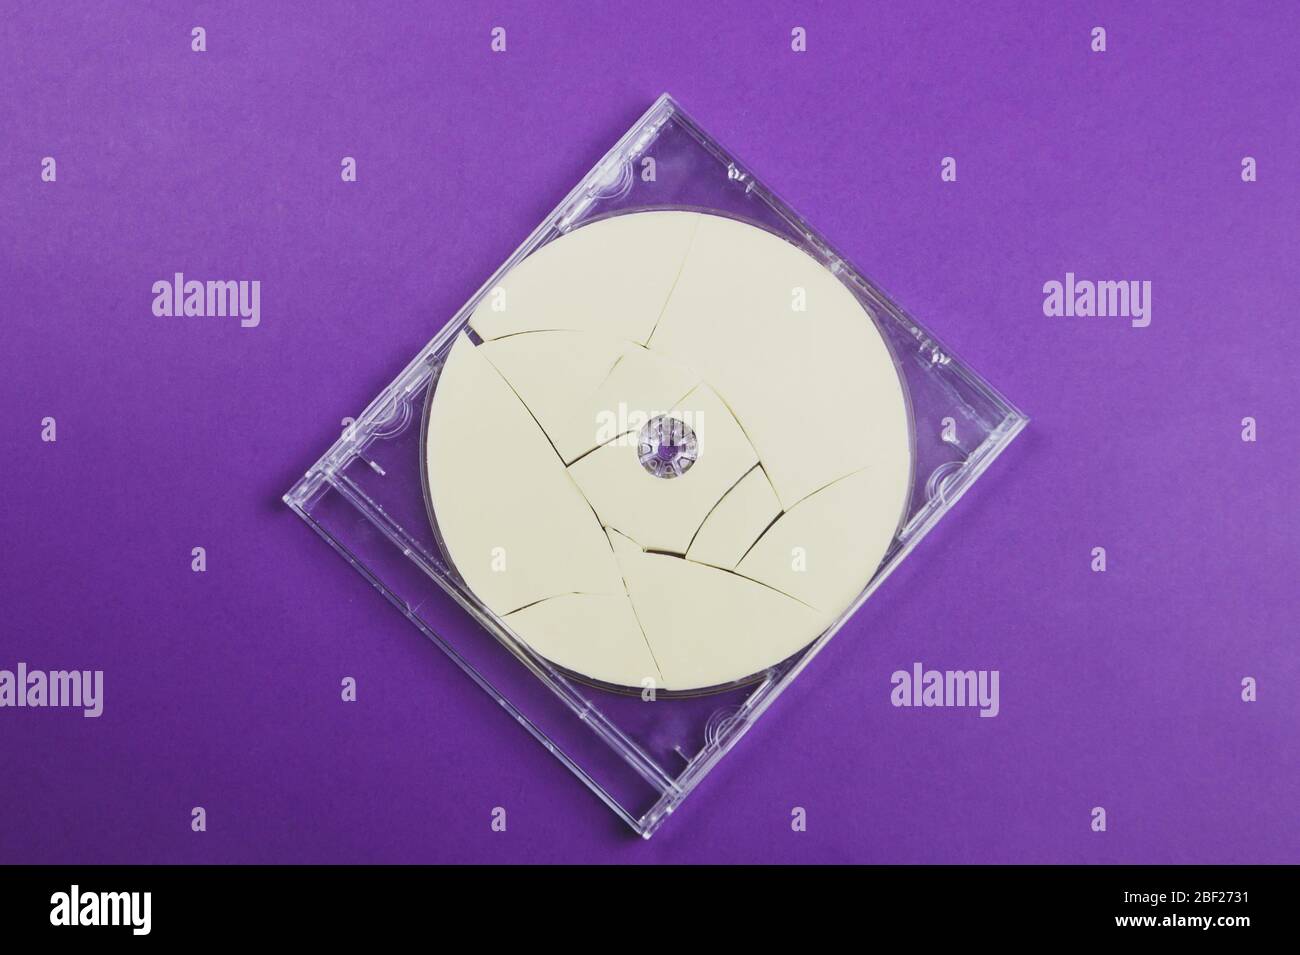 Broken disc in a box on a colored background Stock Photo